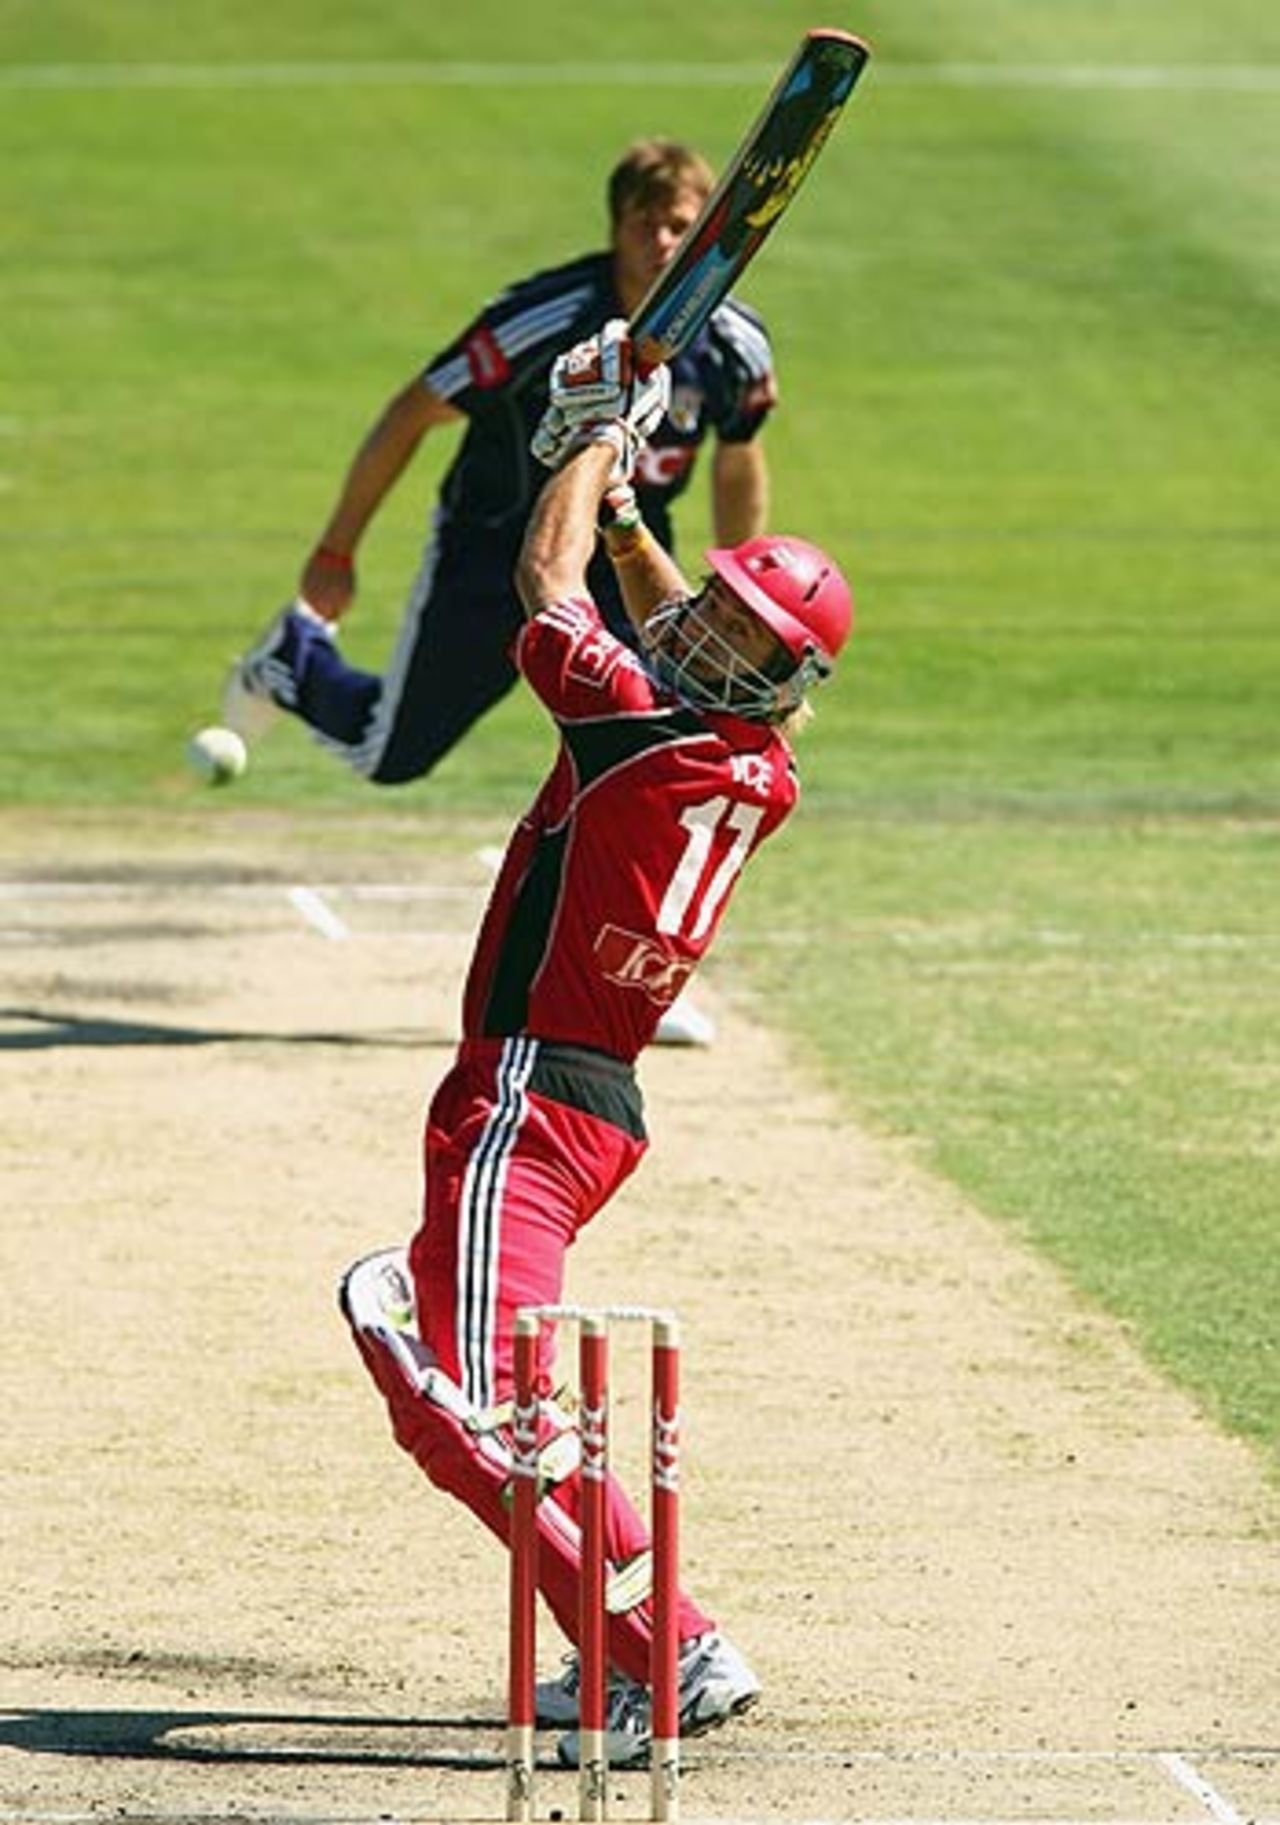 Mark Cleary slashes at a ball from Shane Harwood, Victoria v South Australia, Australian Twenty20 Competition, Group A, Melbourne, January 8, 2006